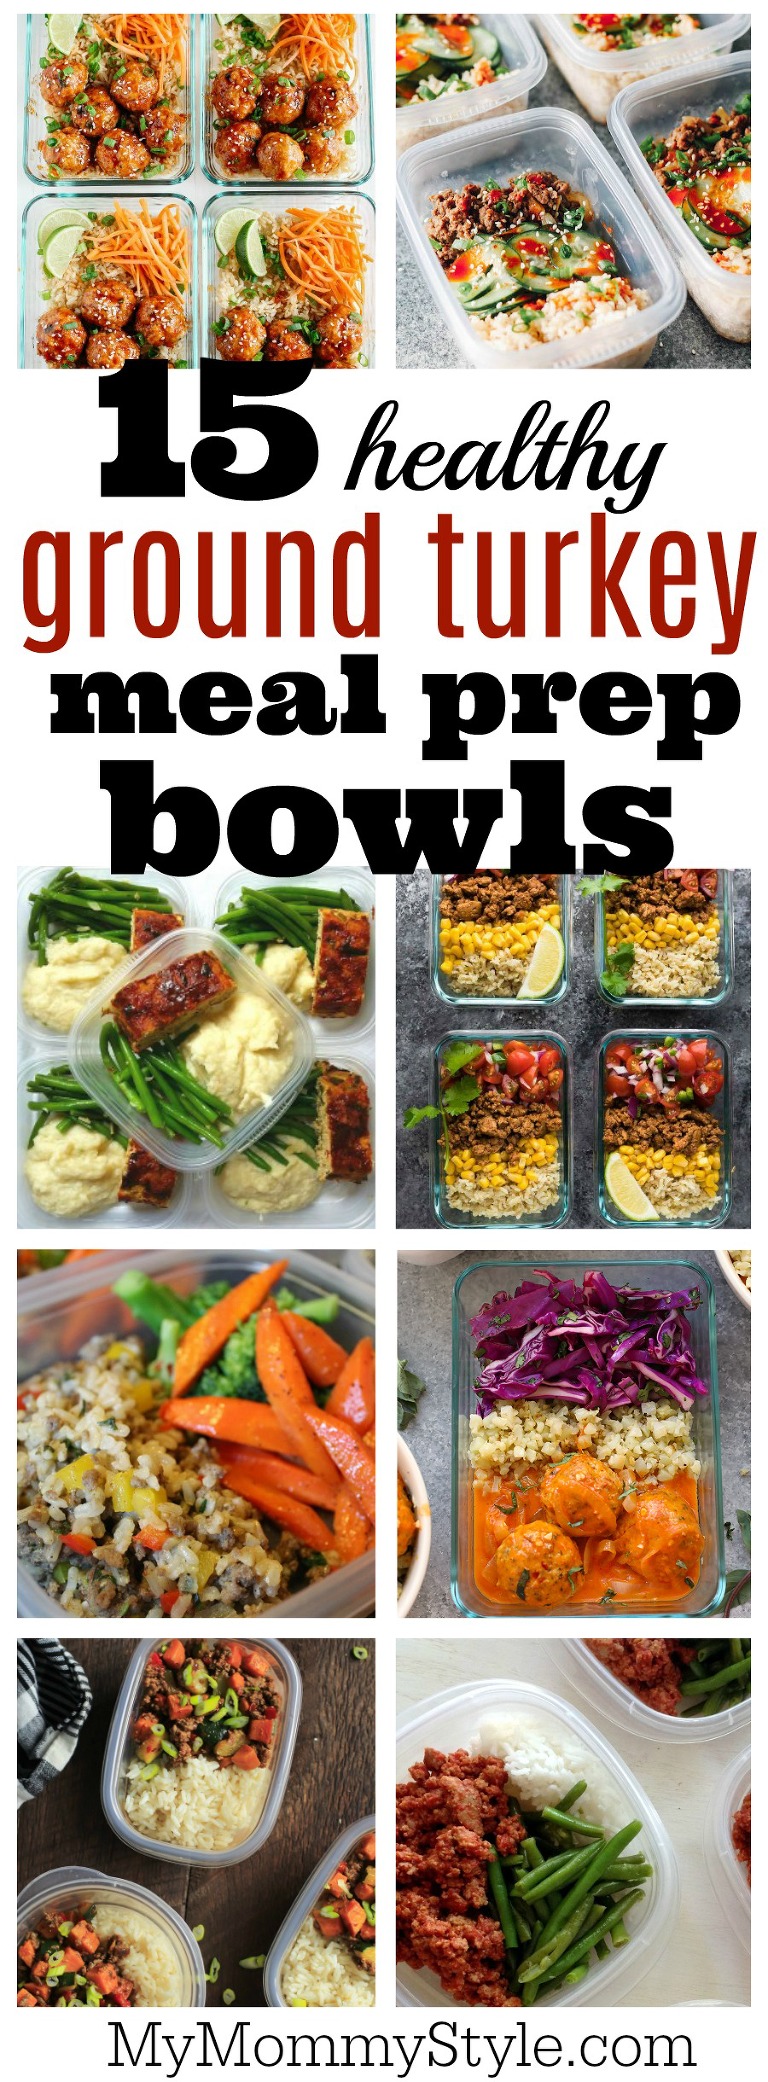 https://www.mymommystyle.com/wp-content/uploads/2017/07/03-21768-post/15-healthy-ground-turkey-meal-prep-bowls(pp_w768_h2082).jpg